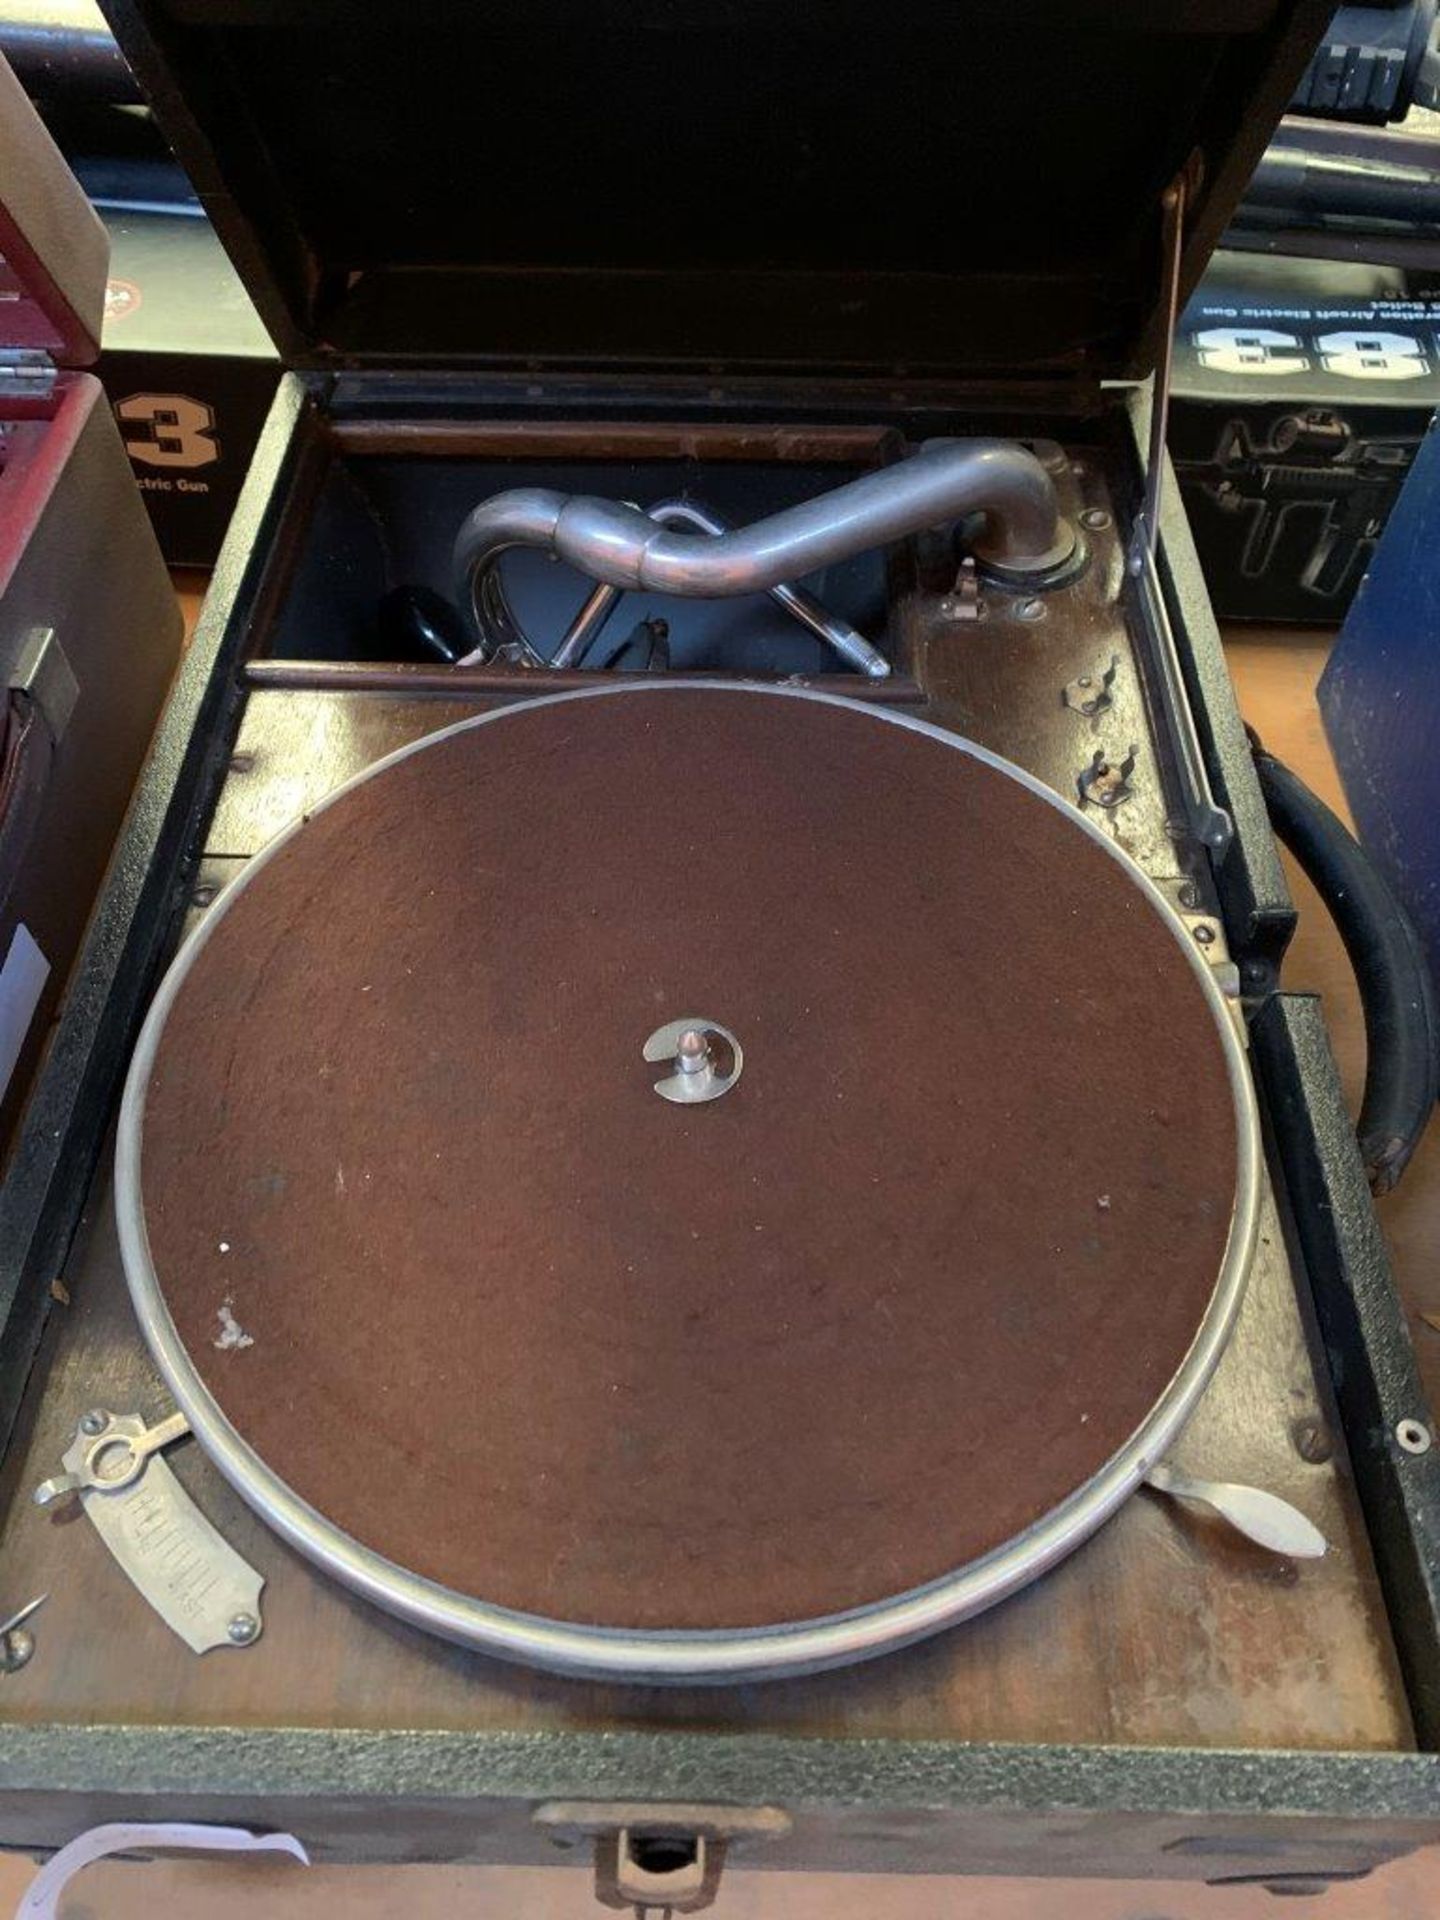 HMV model 102 portable wind up gramophone and another - Image 2 of 2